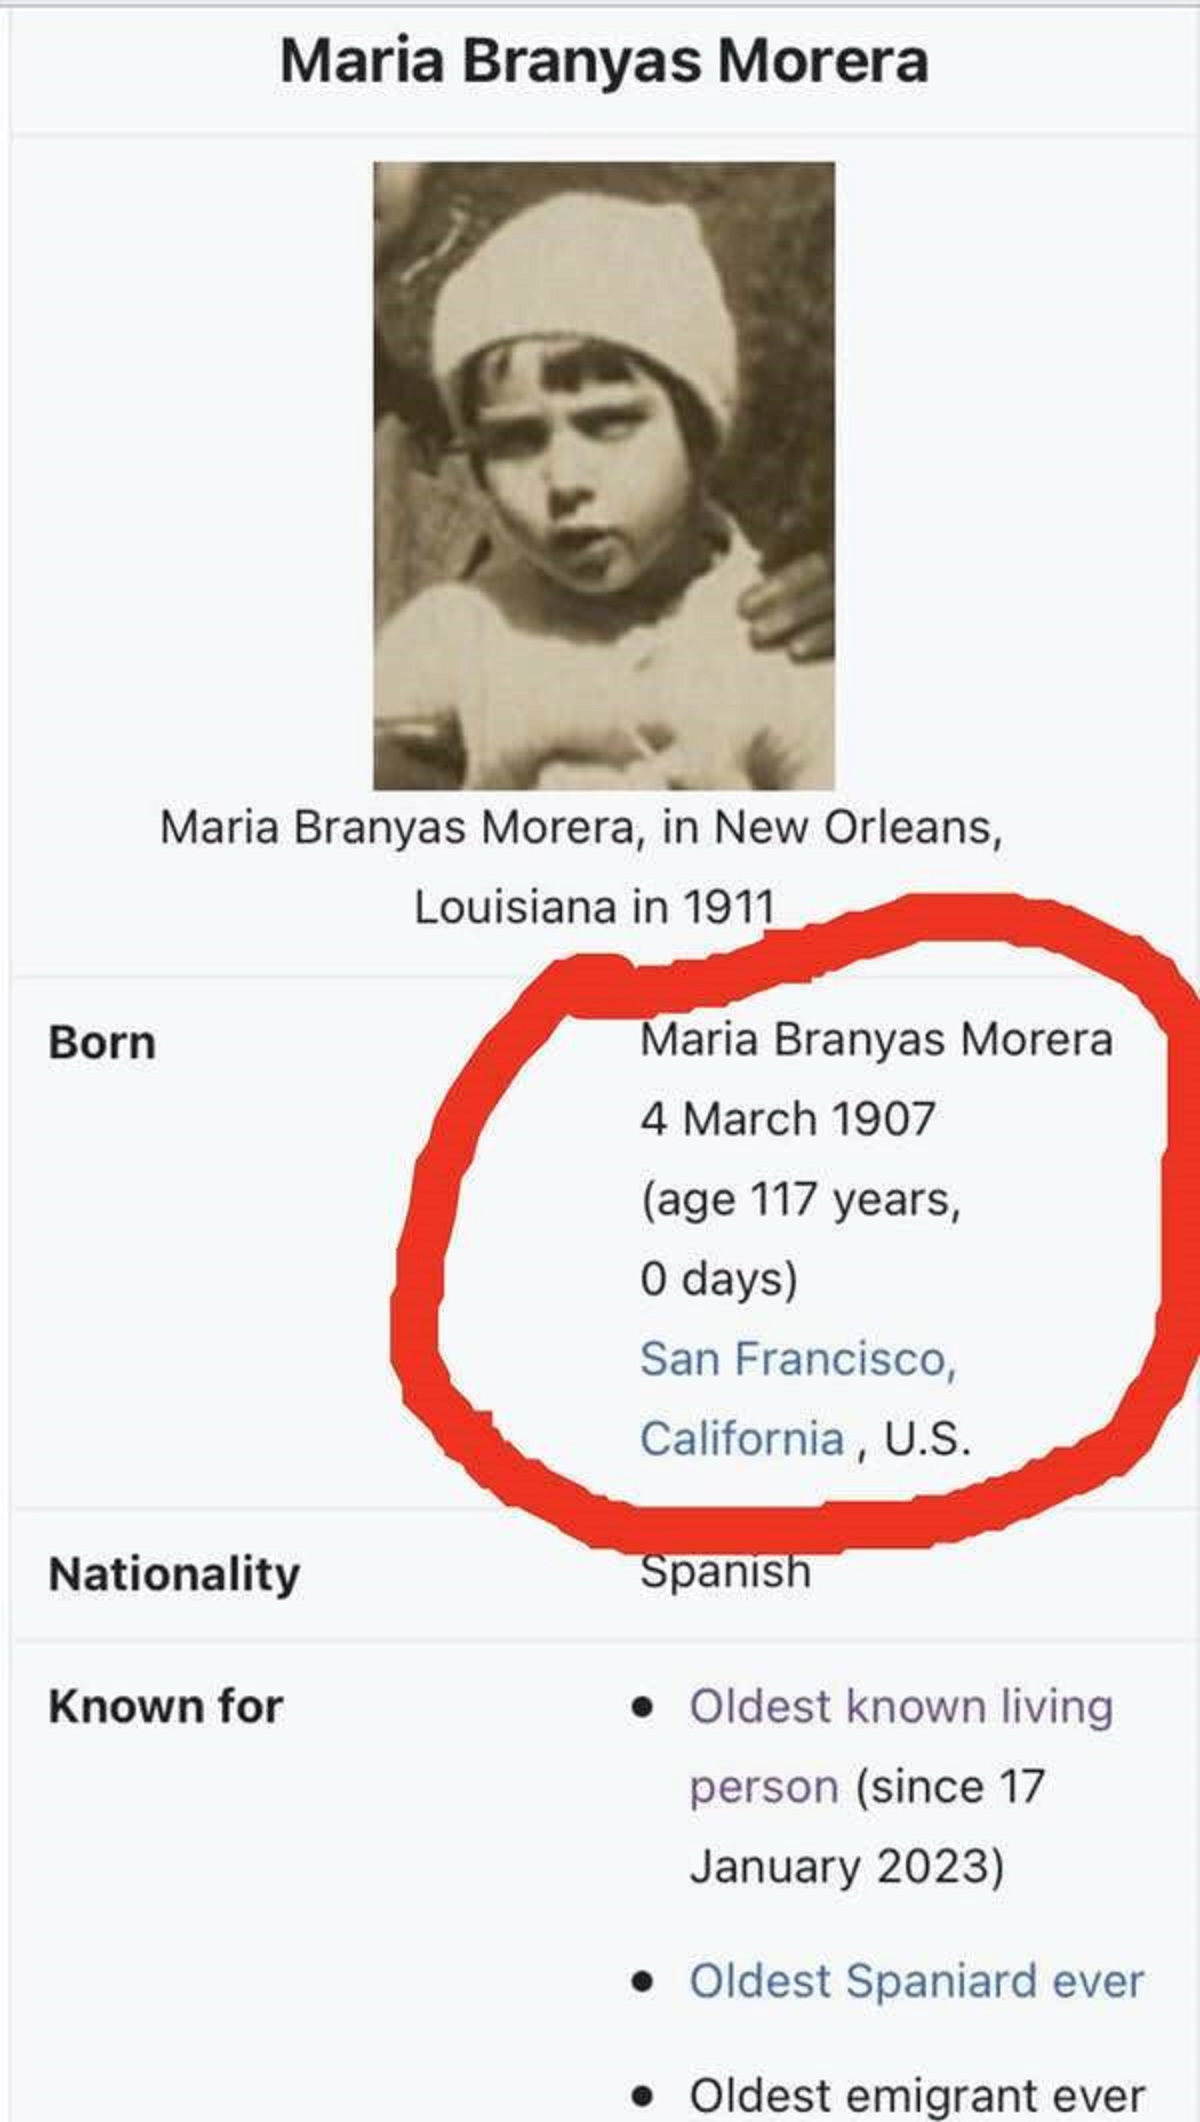 Born Maria Branyas Morera Maria Branyas Morera, in New Orleans, Louisiana in 1911 Nationality Known for Maria Branyas Morera age 117 years, O days San Francisco, California, U.S. Spanish Oldest known living person since Oldest Spaniard ever Oldest emigran